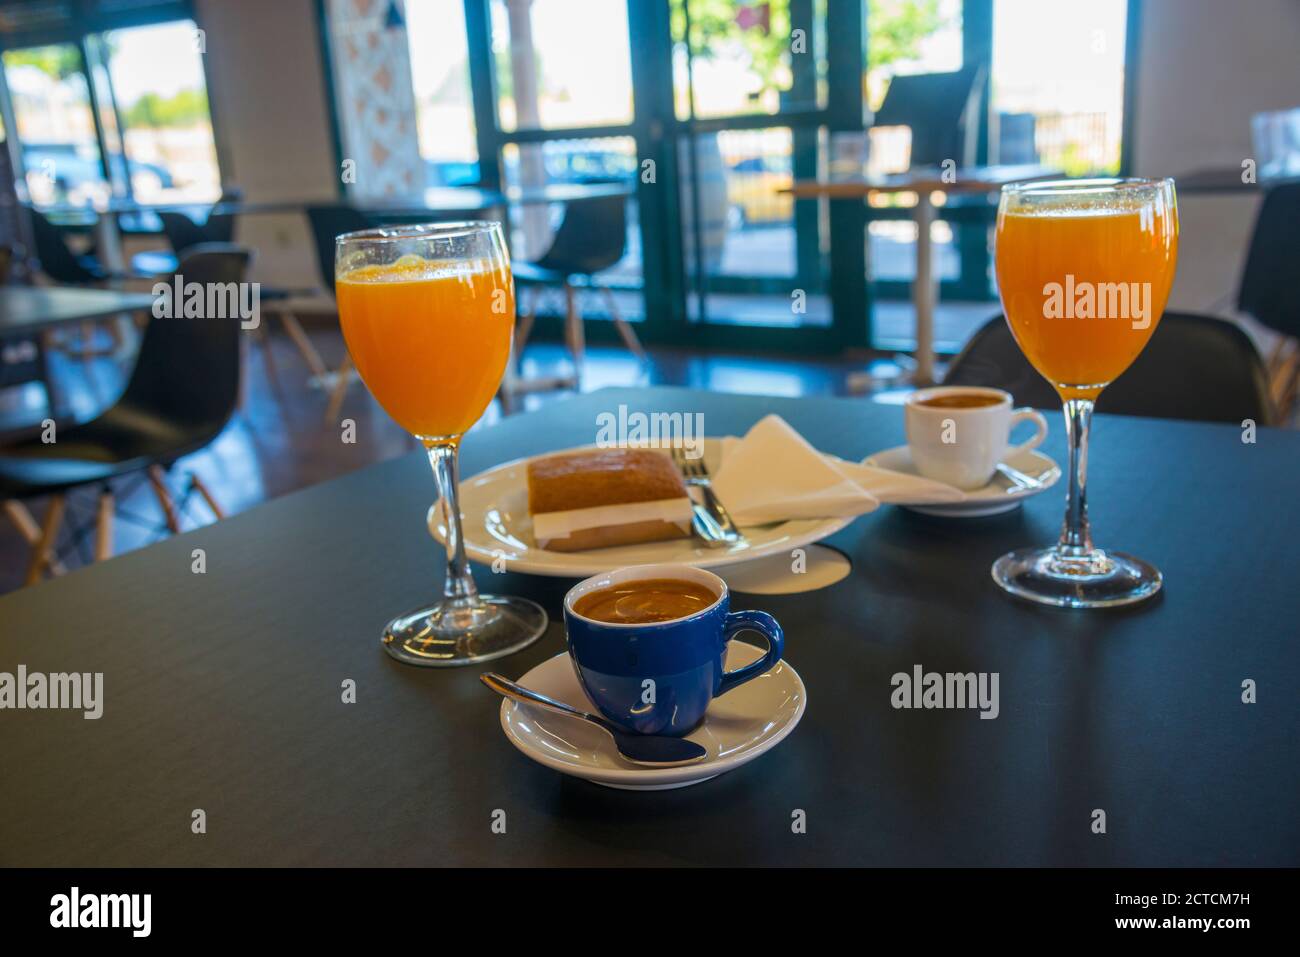 Orange juice, cups of coffee and sobao pasiego in a cafeteria. Spain. Stock Photo